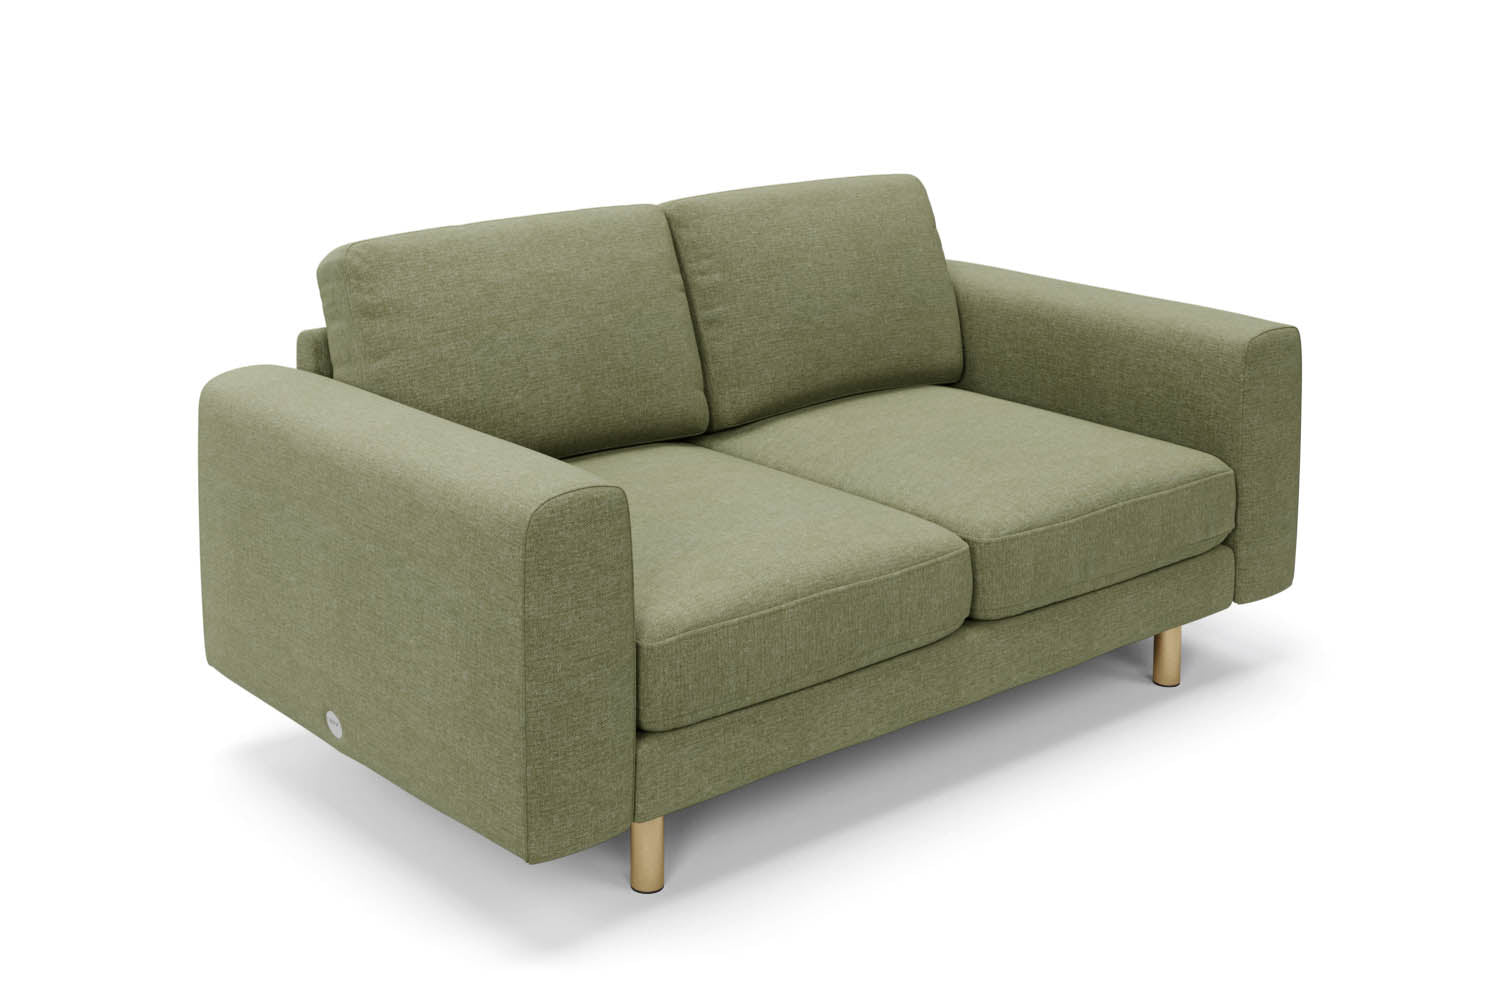 The Big Chill 2 Seater Sofa in Sage Chenille with metal legs